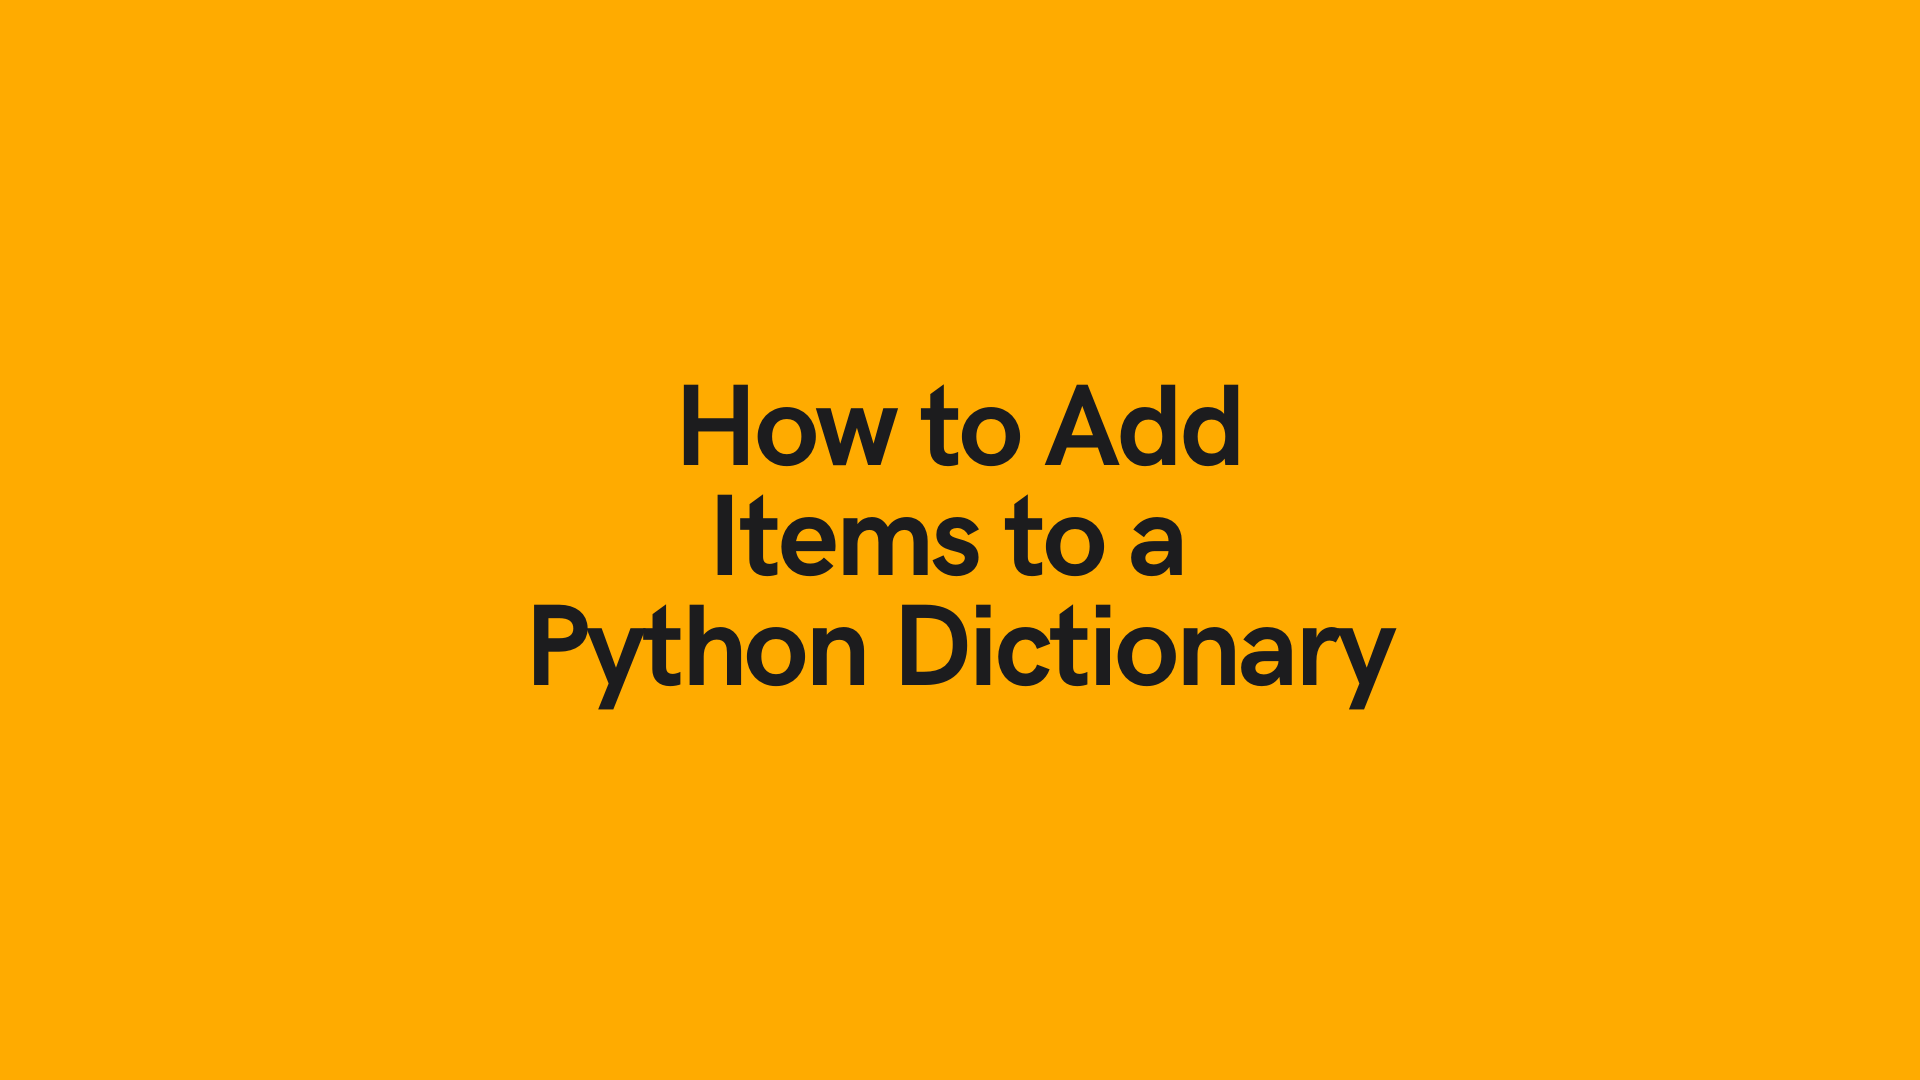 https://datagy.io/wp-content/uploads/2021/11/How-to-Add-Items-to-a-Python-Dictionary-Cover-Image.png